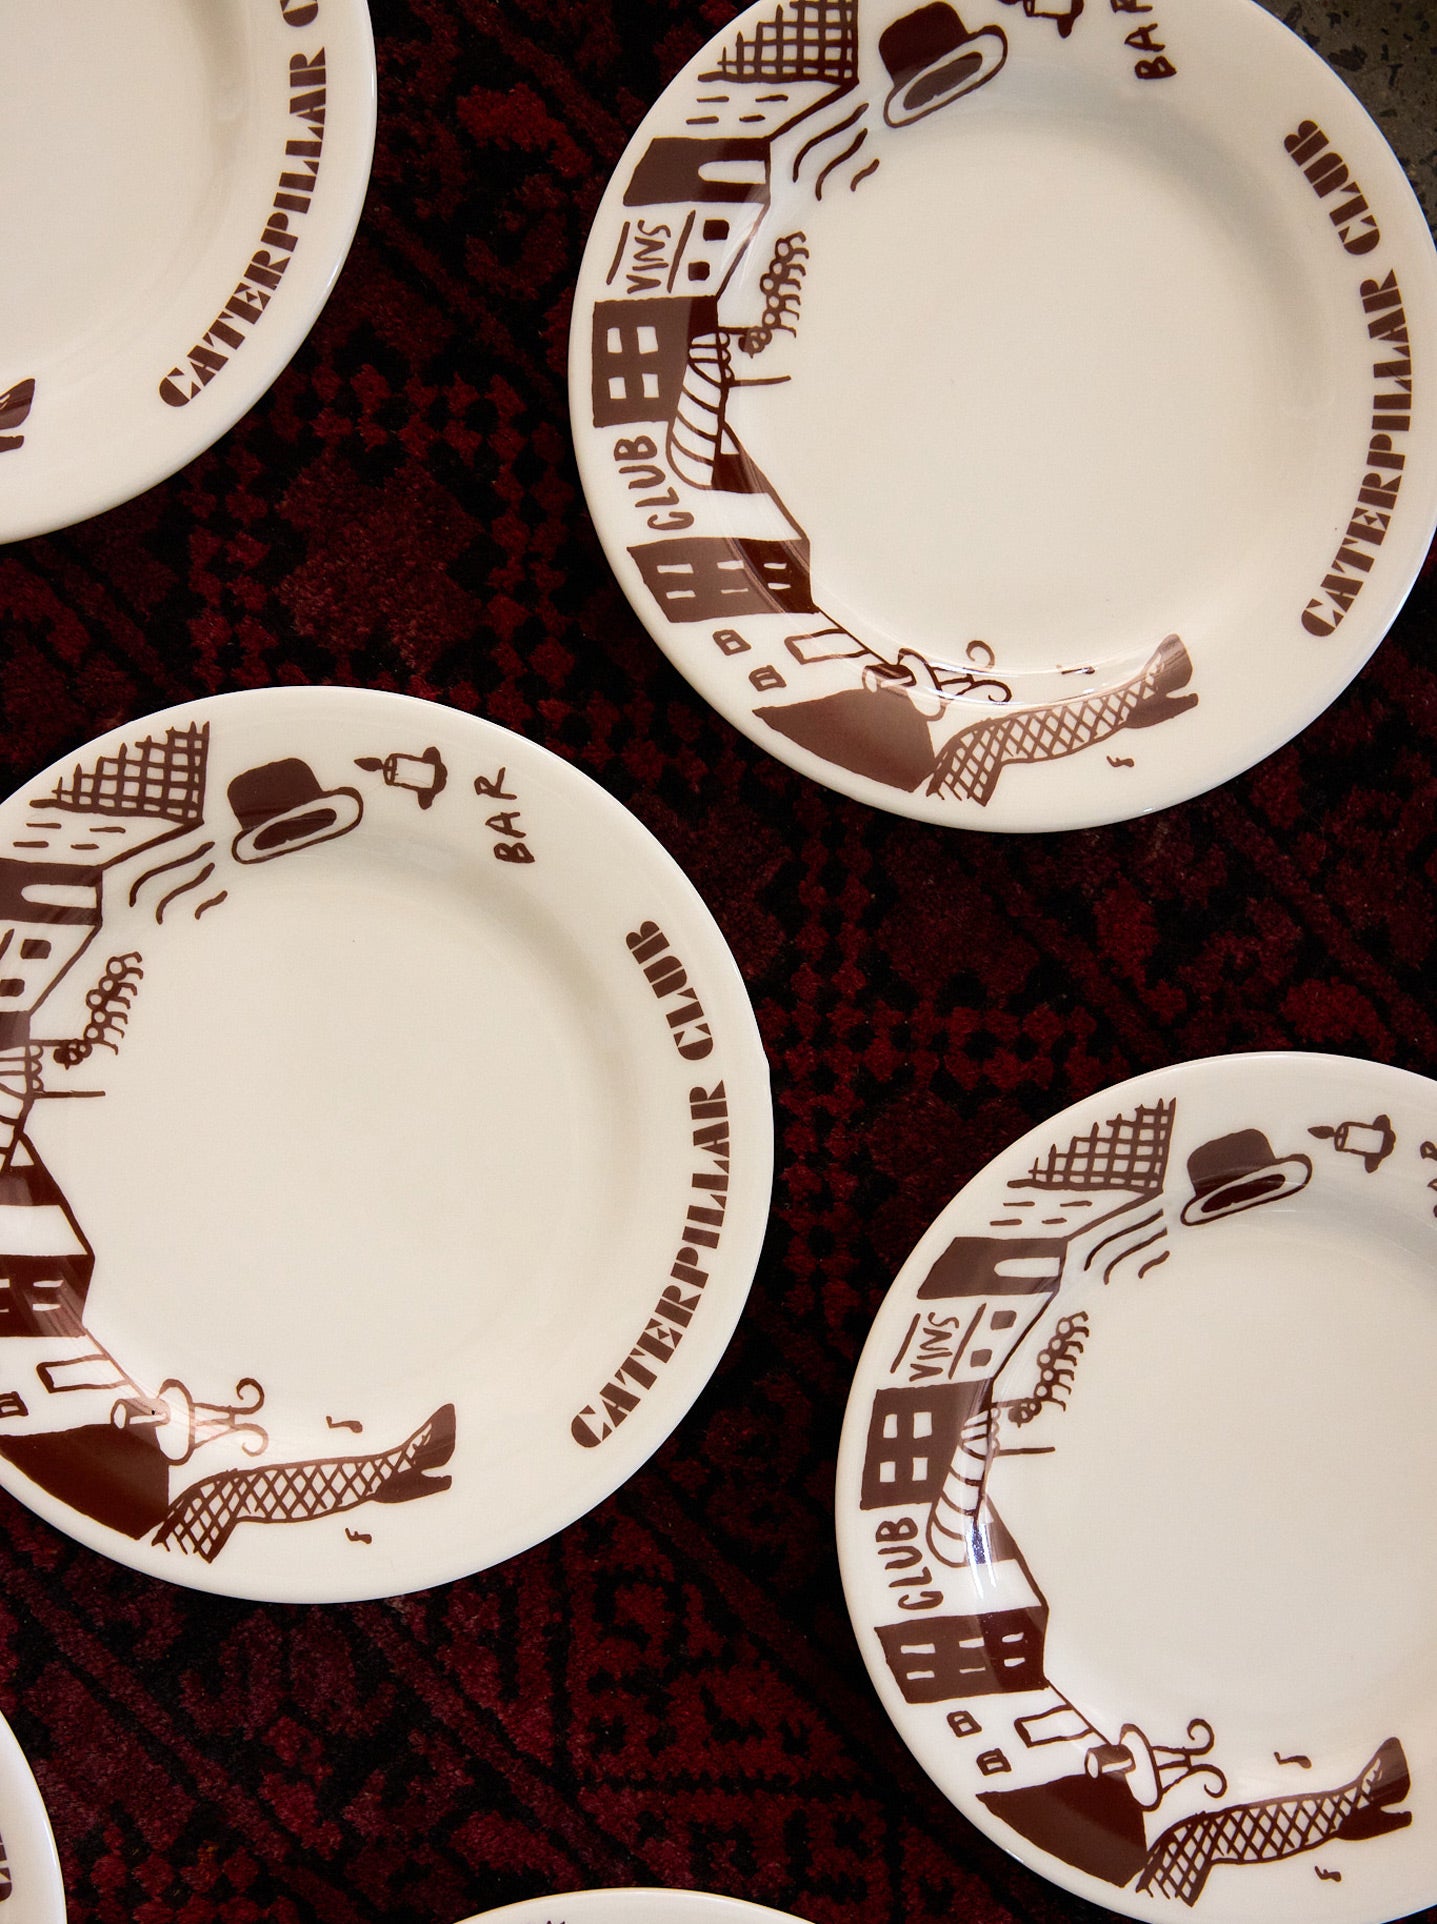 The Caterpillar Club Plate Set - Limited Edition